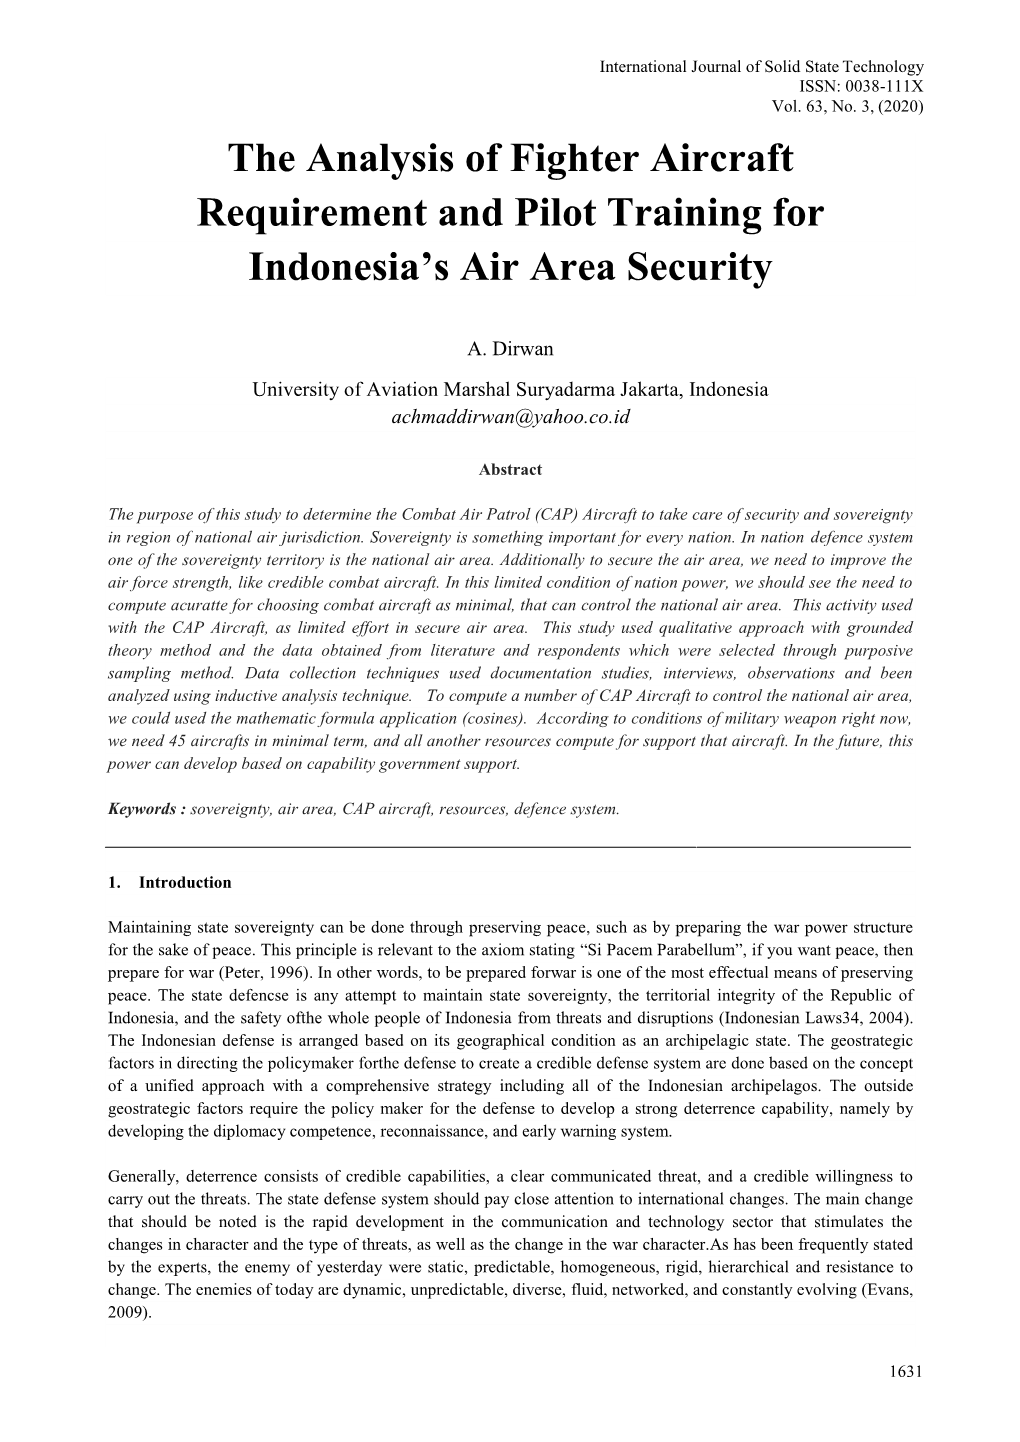 The Analysis of Fighter Aircraft Requirement and Pilot Training for Indonesia’S Air Area Security